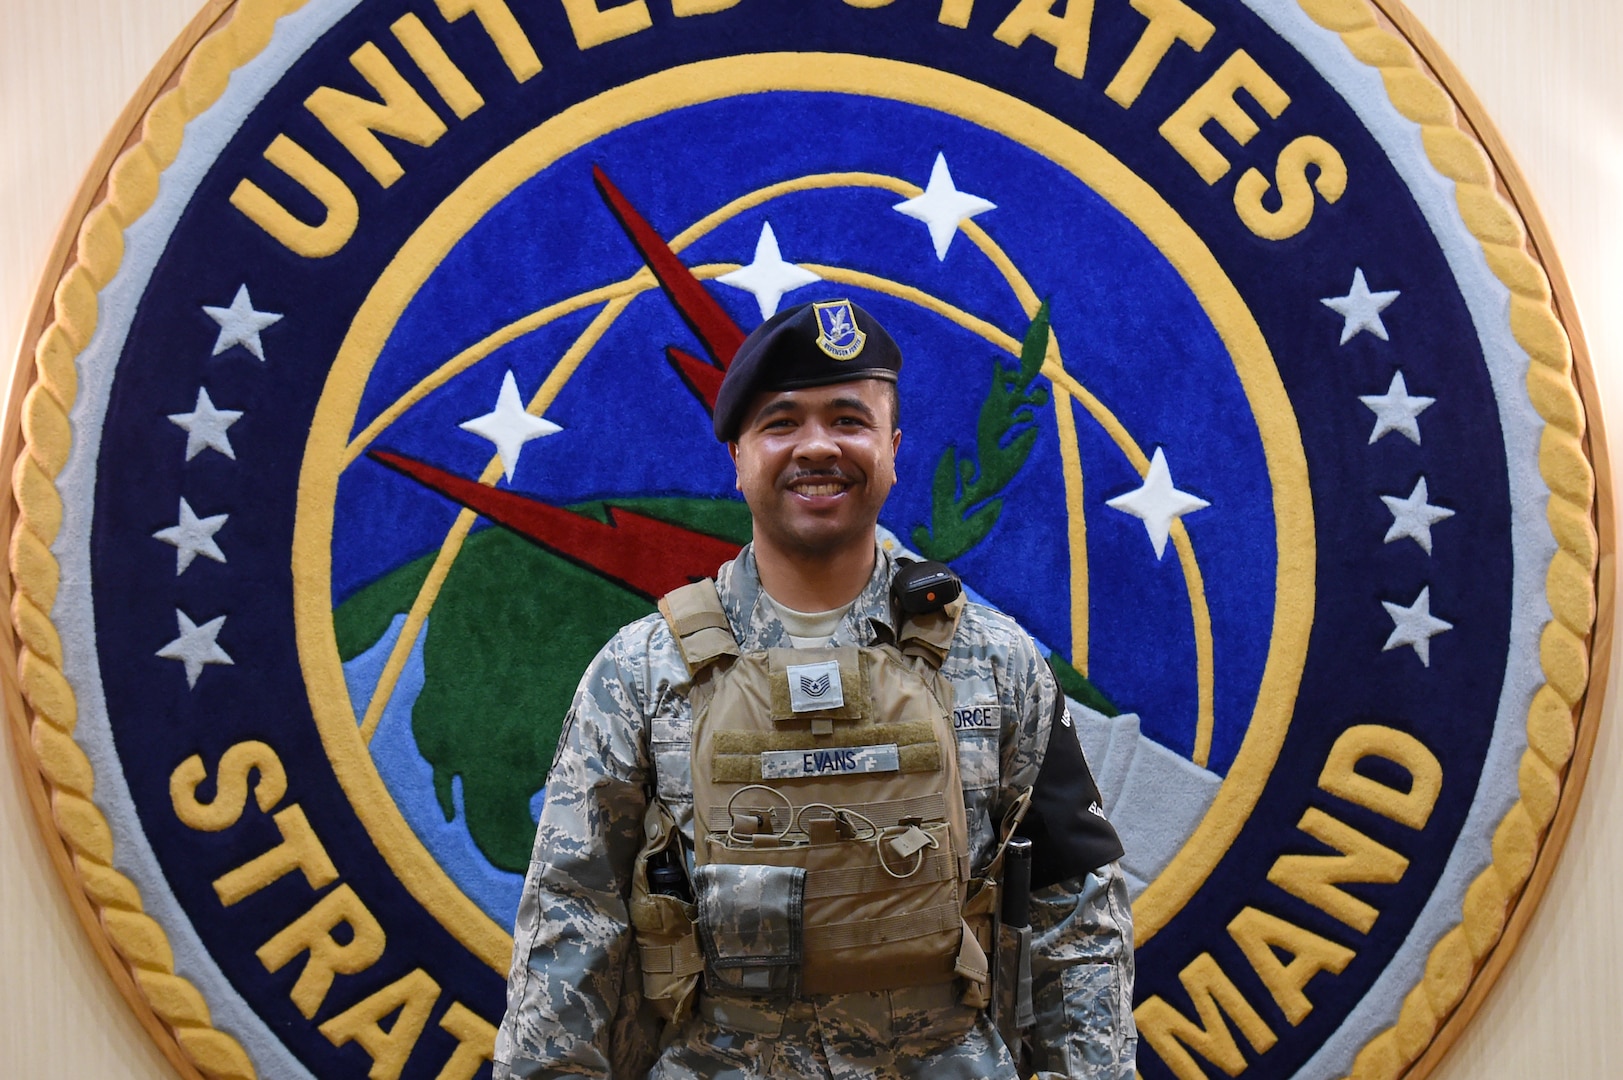 U.S. Air Force Tech. Sgt. Alan Keith Evans is selected as the Enlisted Corps Spotlight for July.